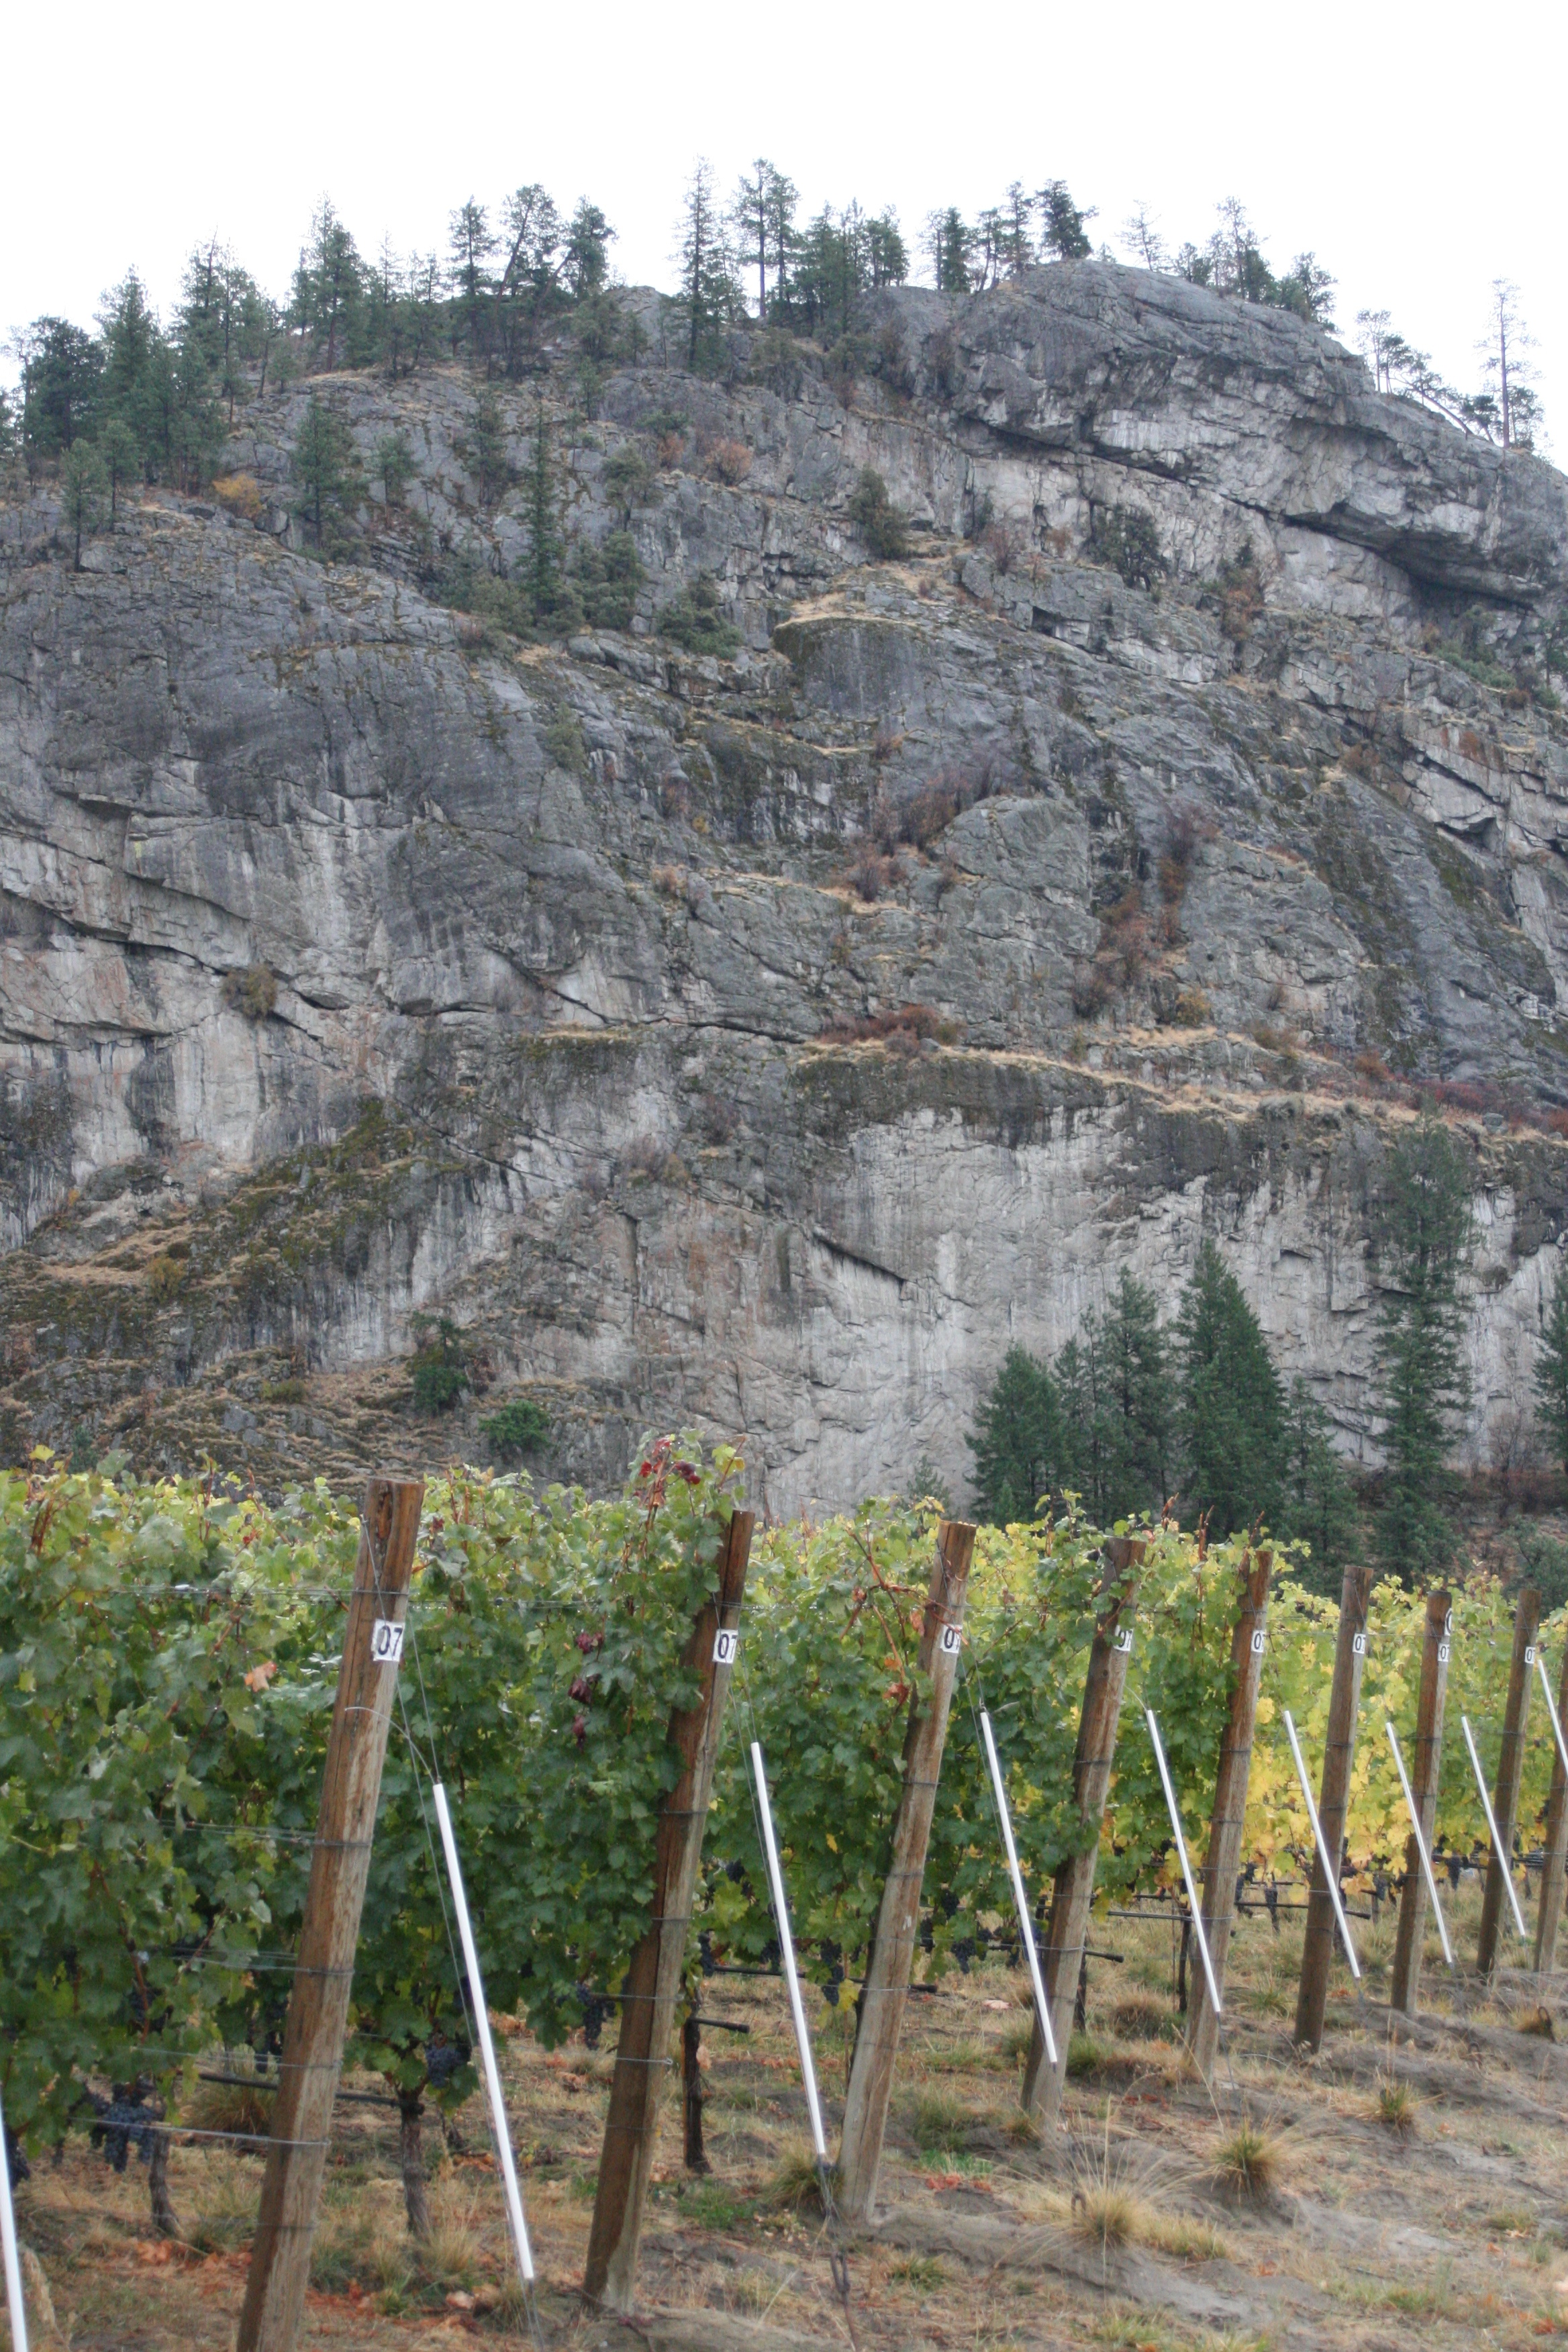  Vineyard against the rock wall of the Skaha Bluffs 